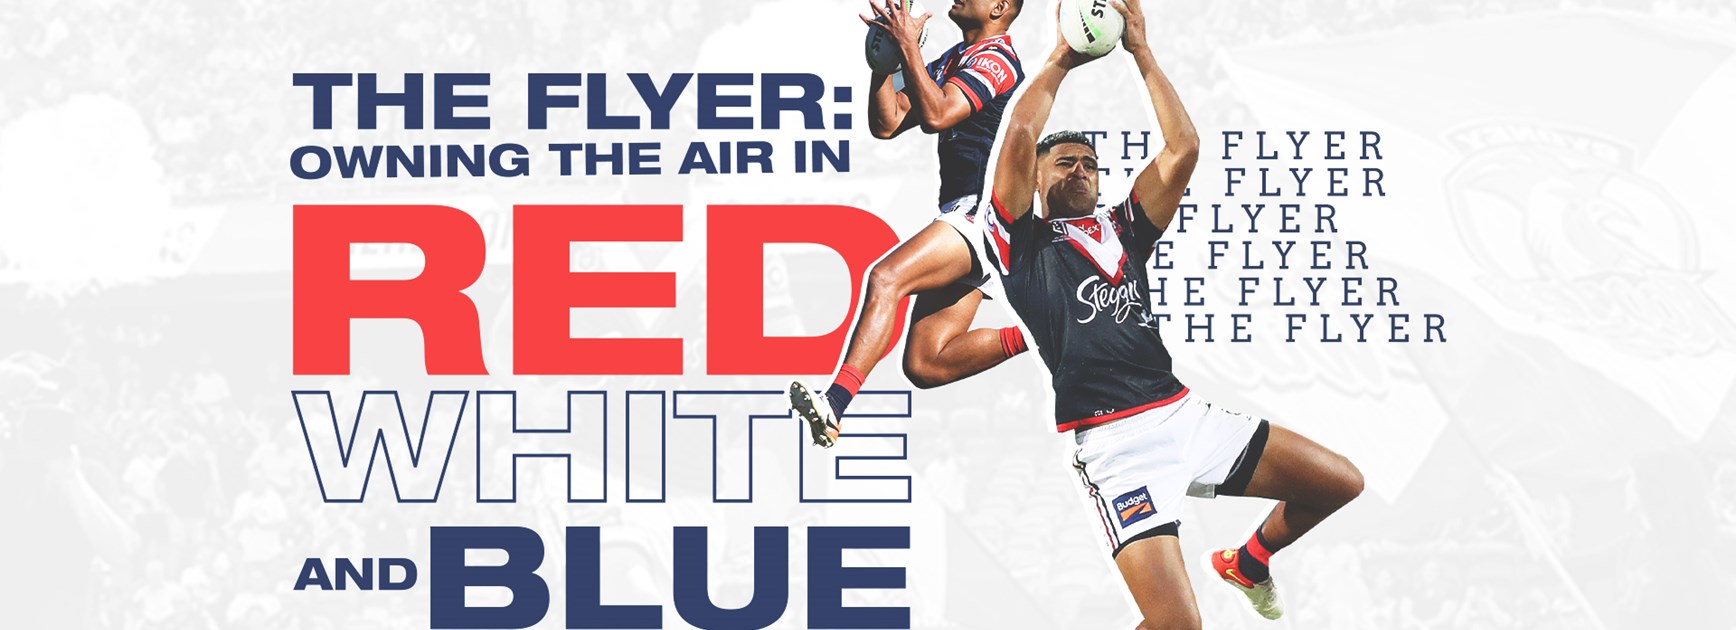 The Flyer: Owning the Air in Red, White and Blue